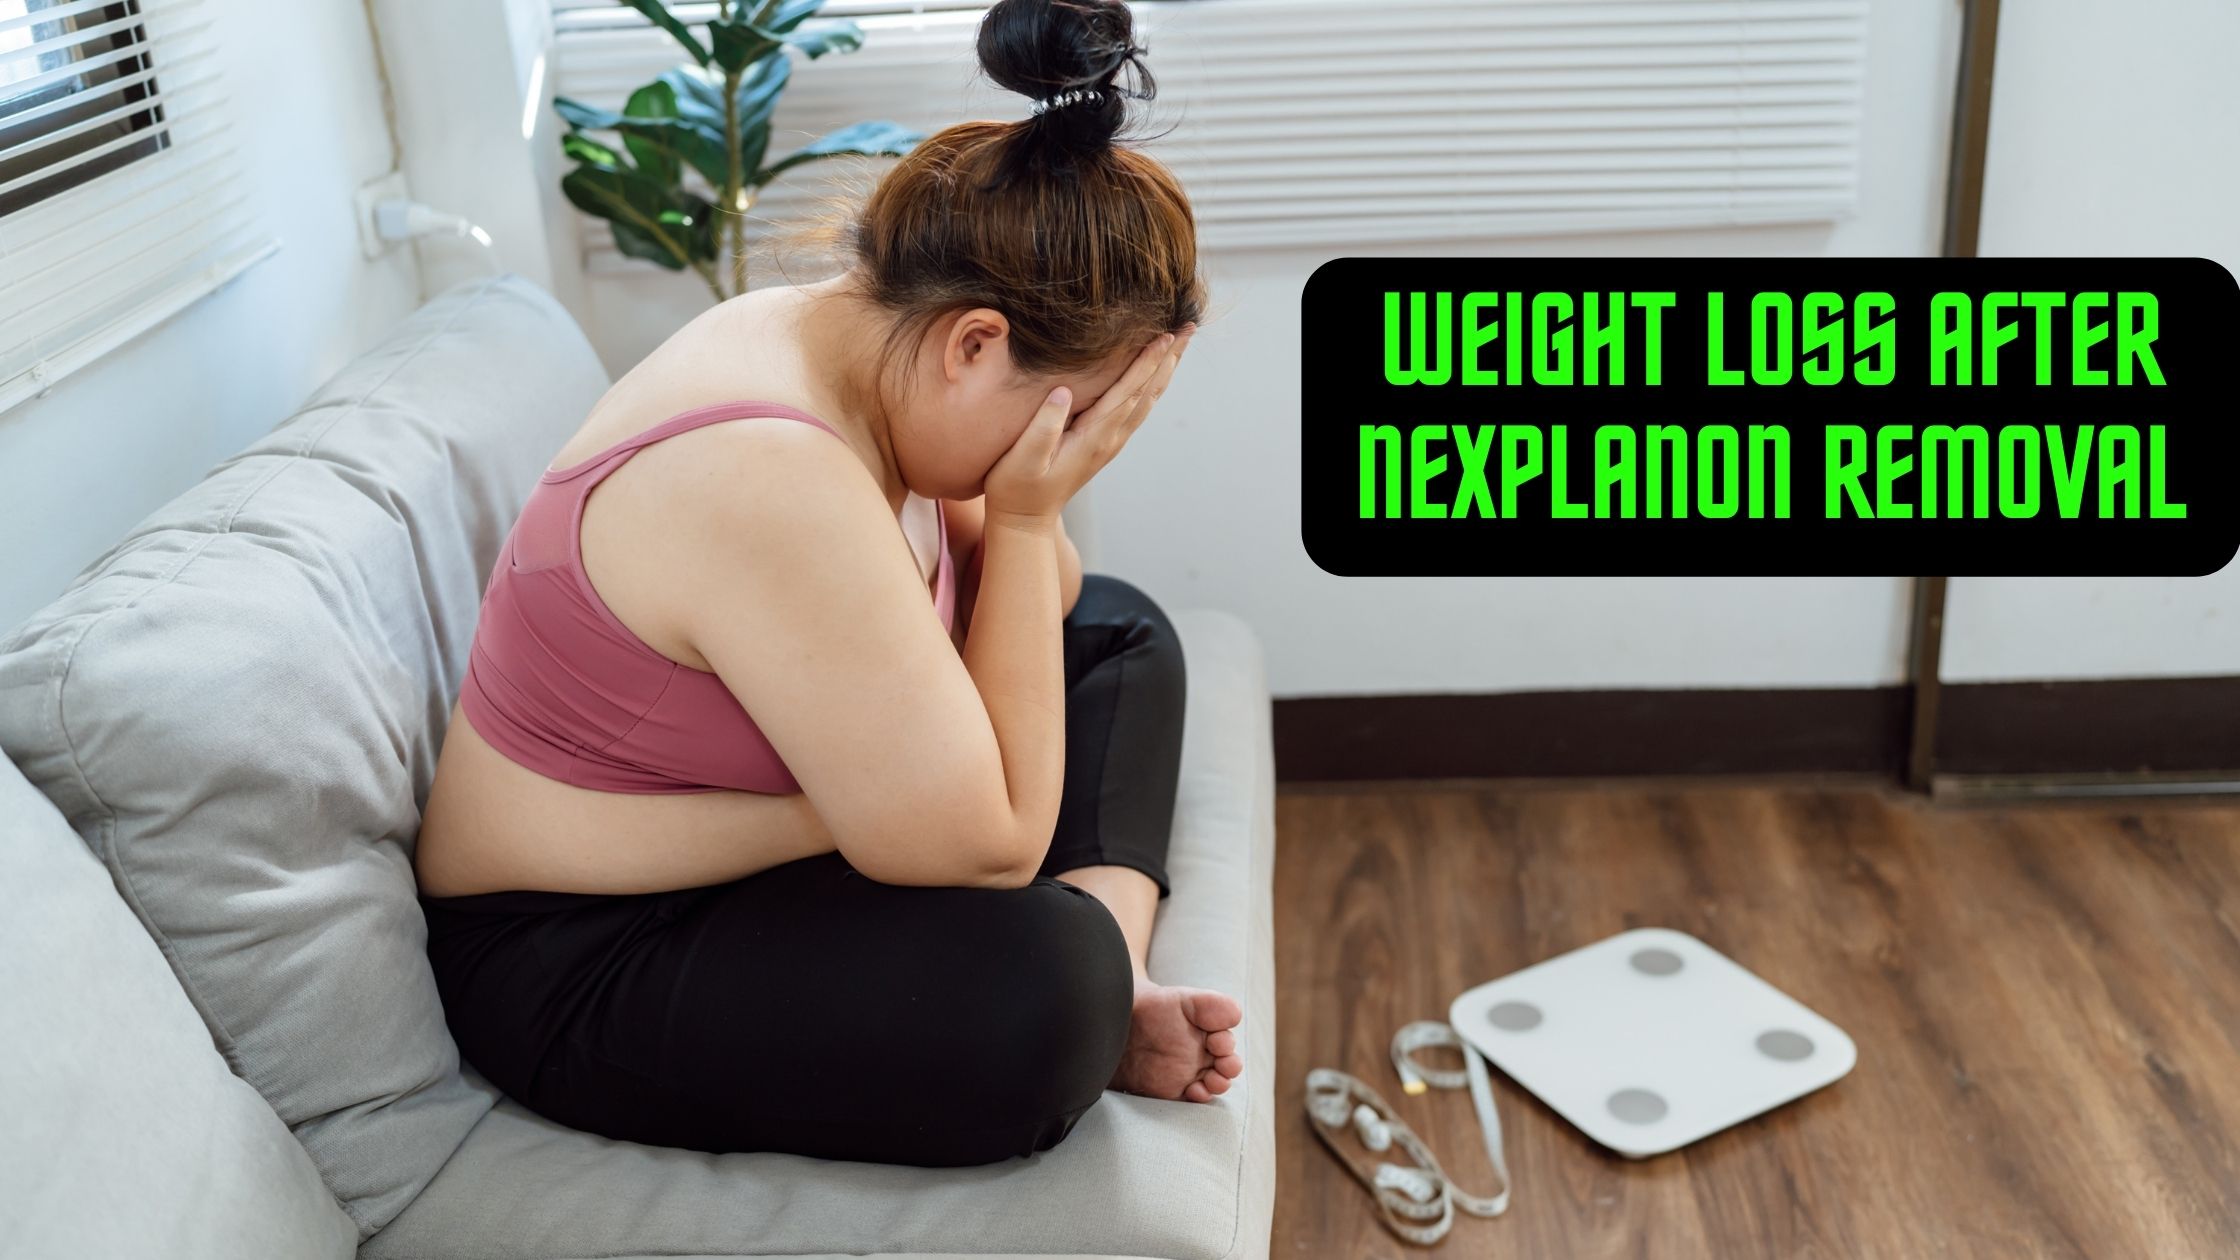 weight loss after Nexplanon removal